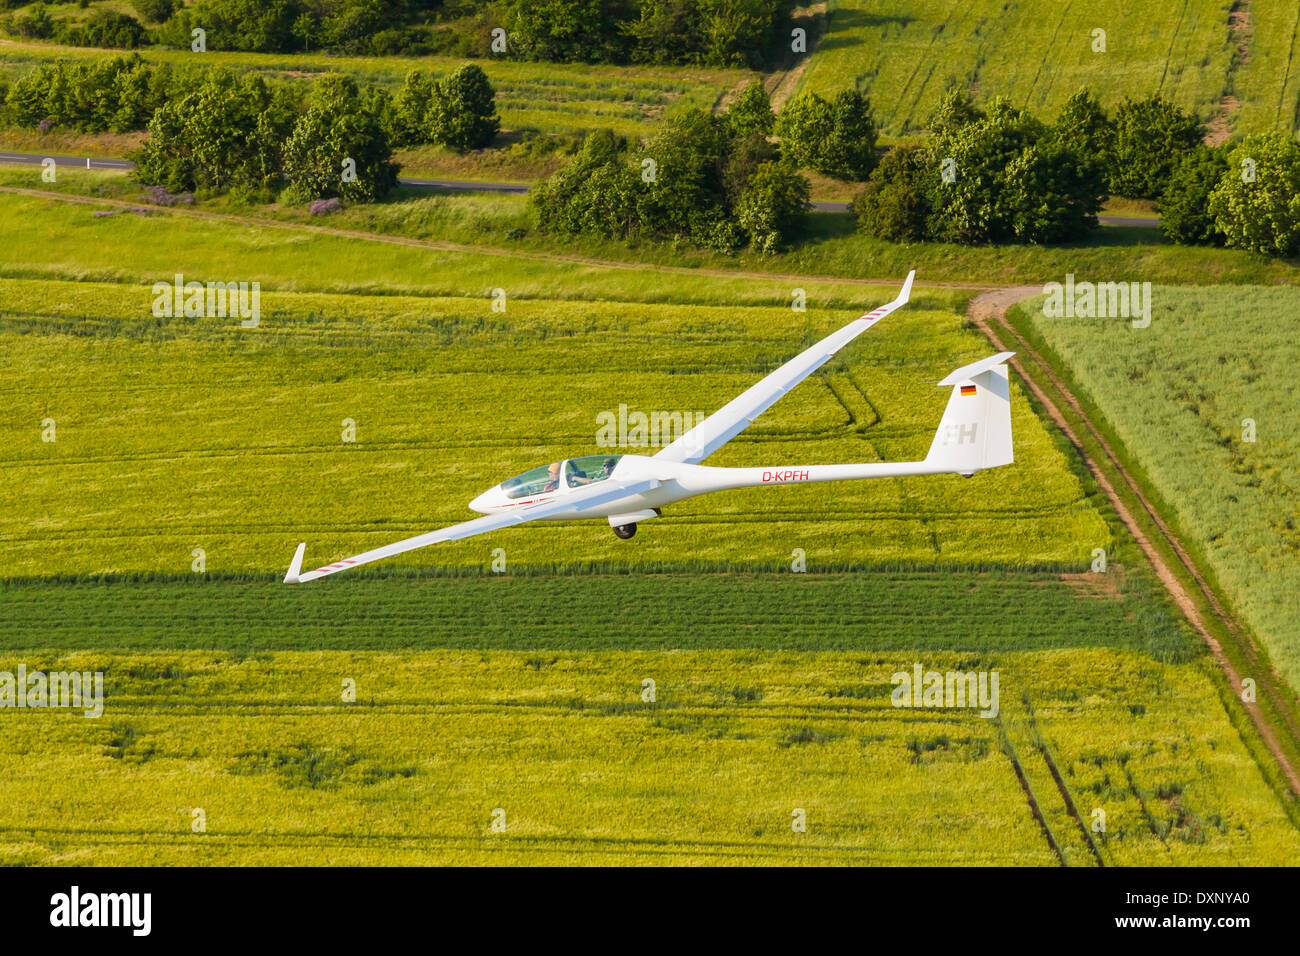 Germany, Bavaria, Franconia, Rhoen, glider Schleicher ASH 25 is approaching airfield Stock Photo